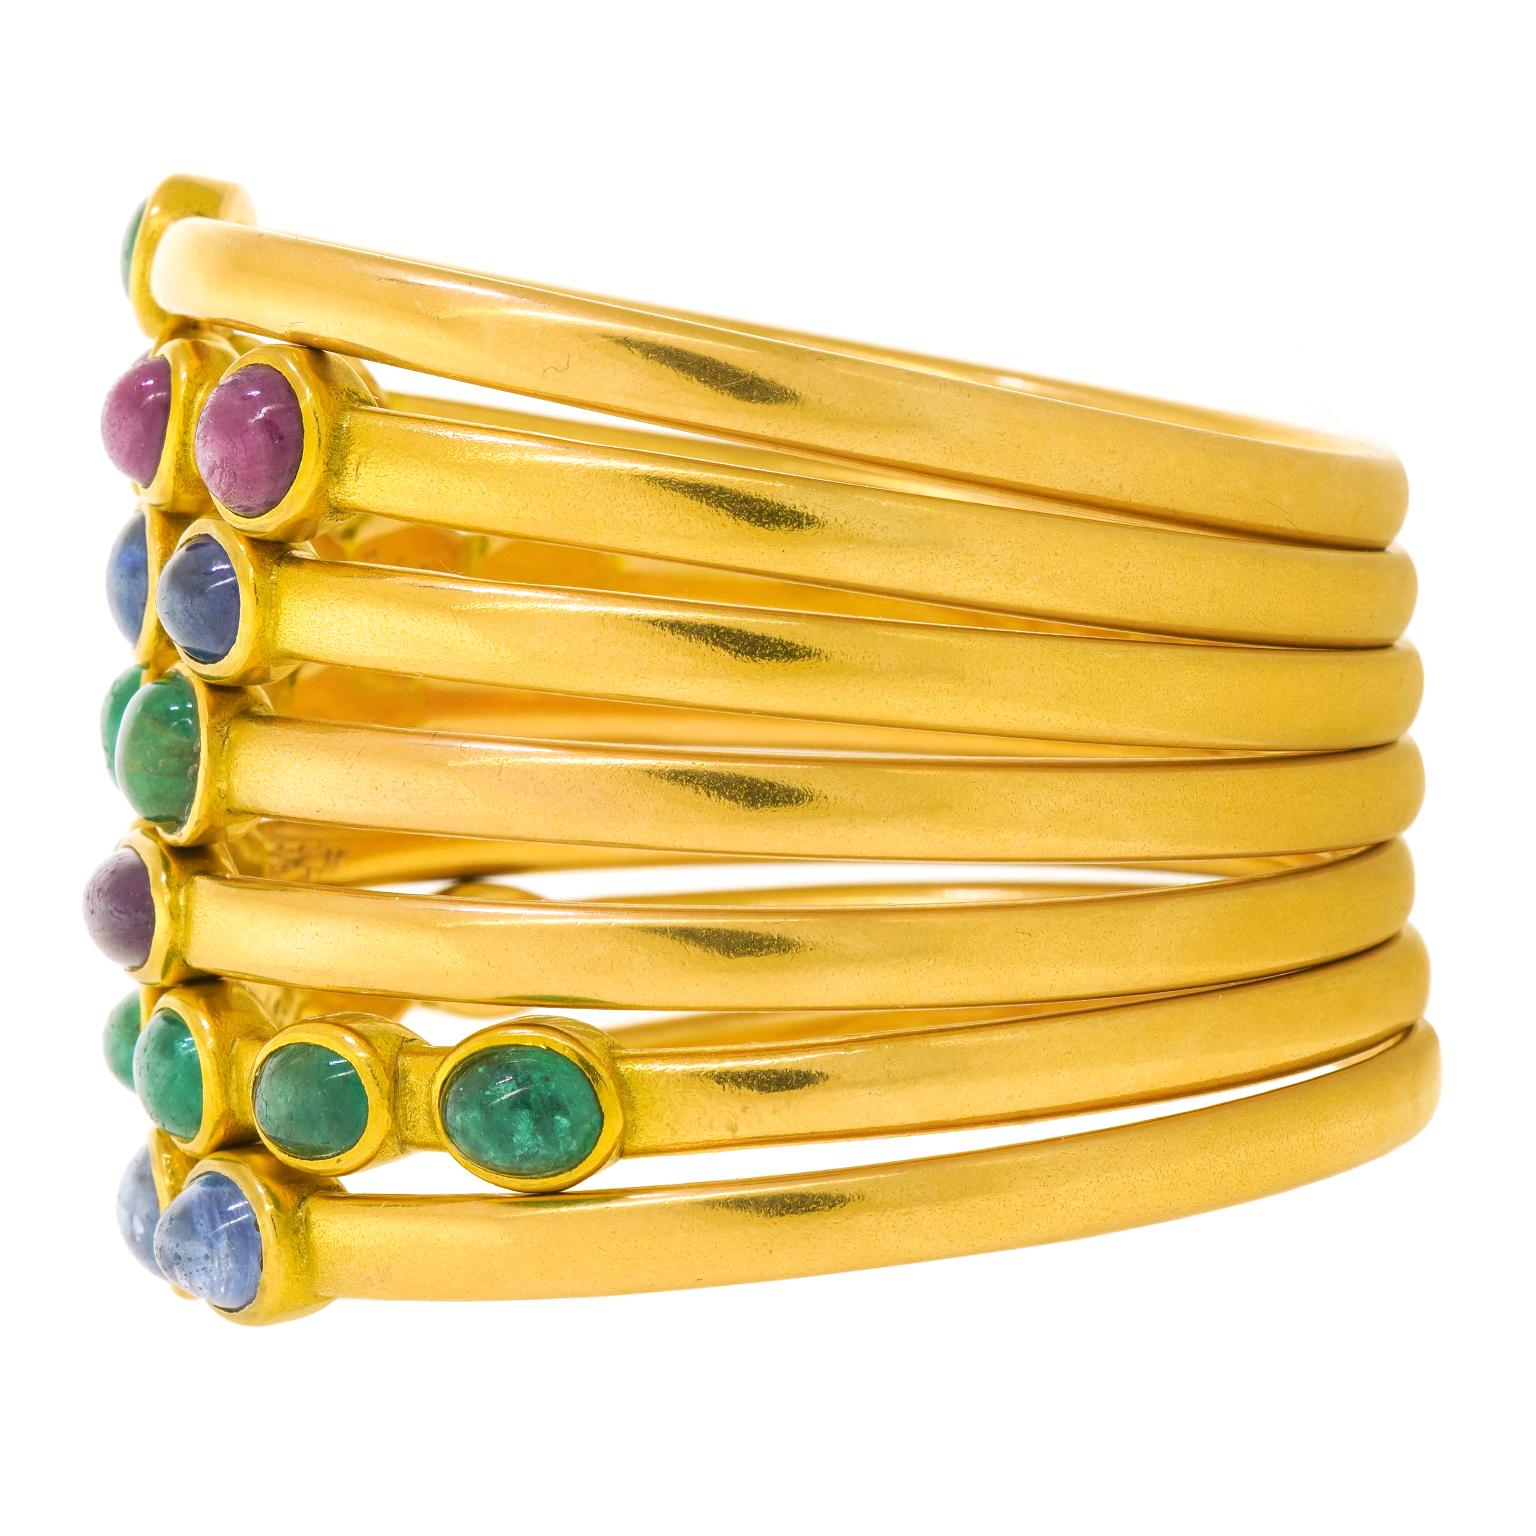 One-of-a-kind Set of 7 Michael Zobel Modernist Gold Bracelets In Excellent Condition For Sale In Litchfield, CT